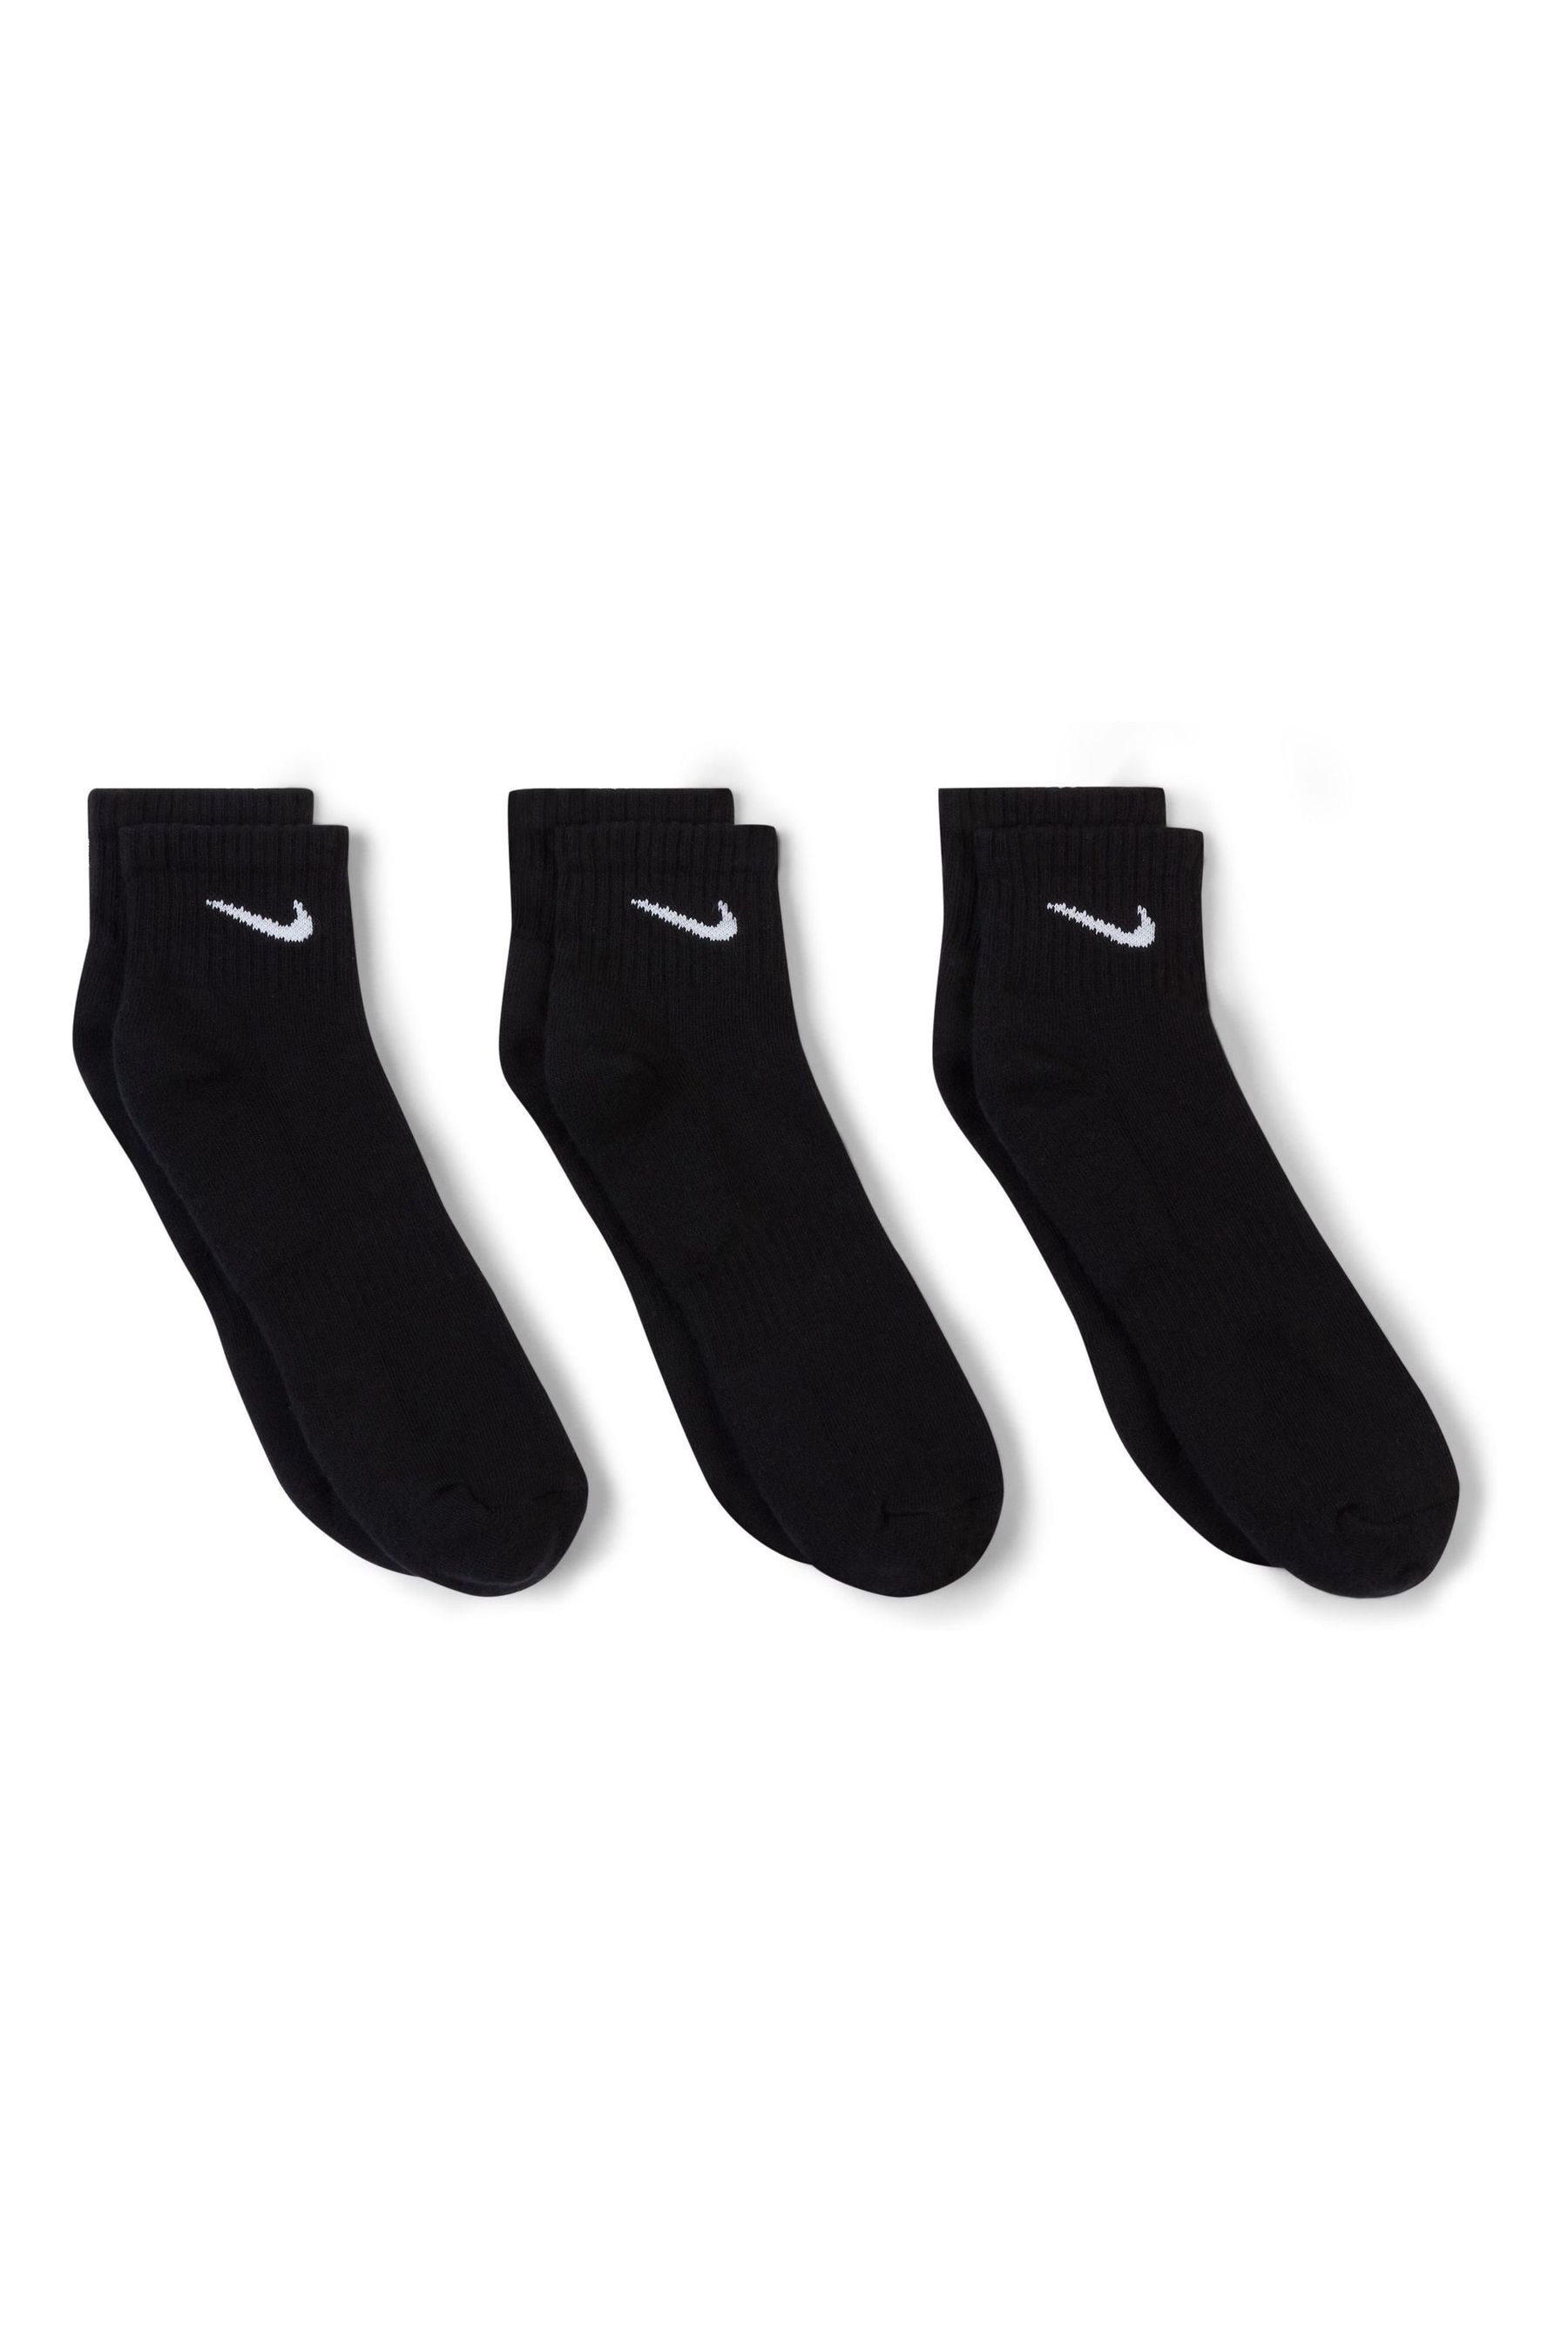 Buy Nike Black Everyday Cushioned Ankle Socks 3 Pack from the Next UK ...